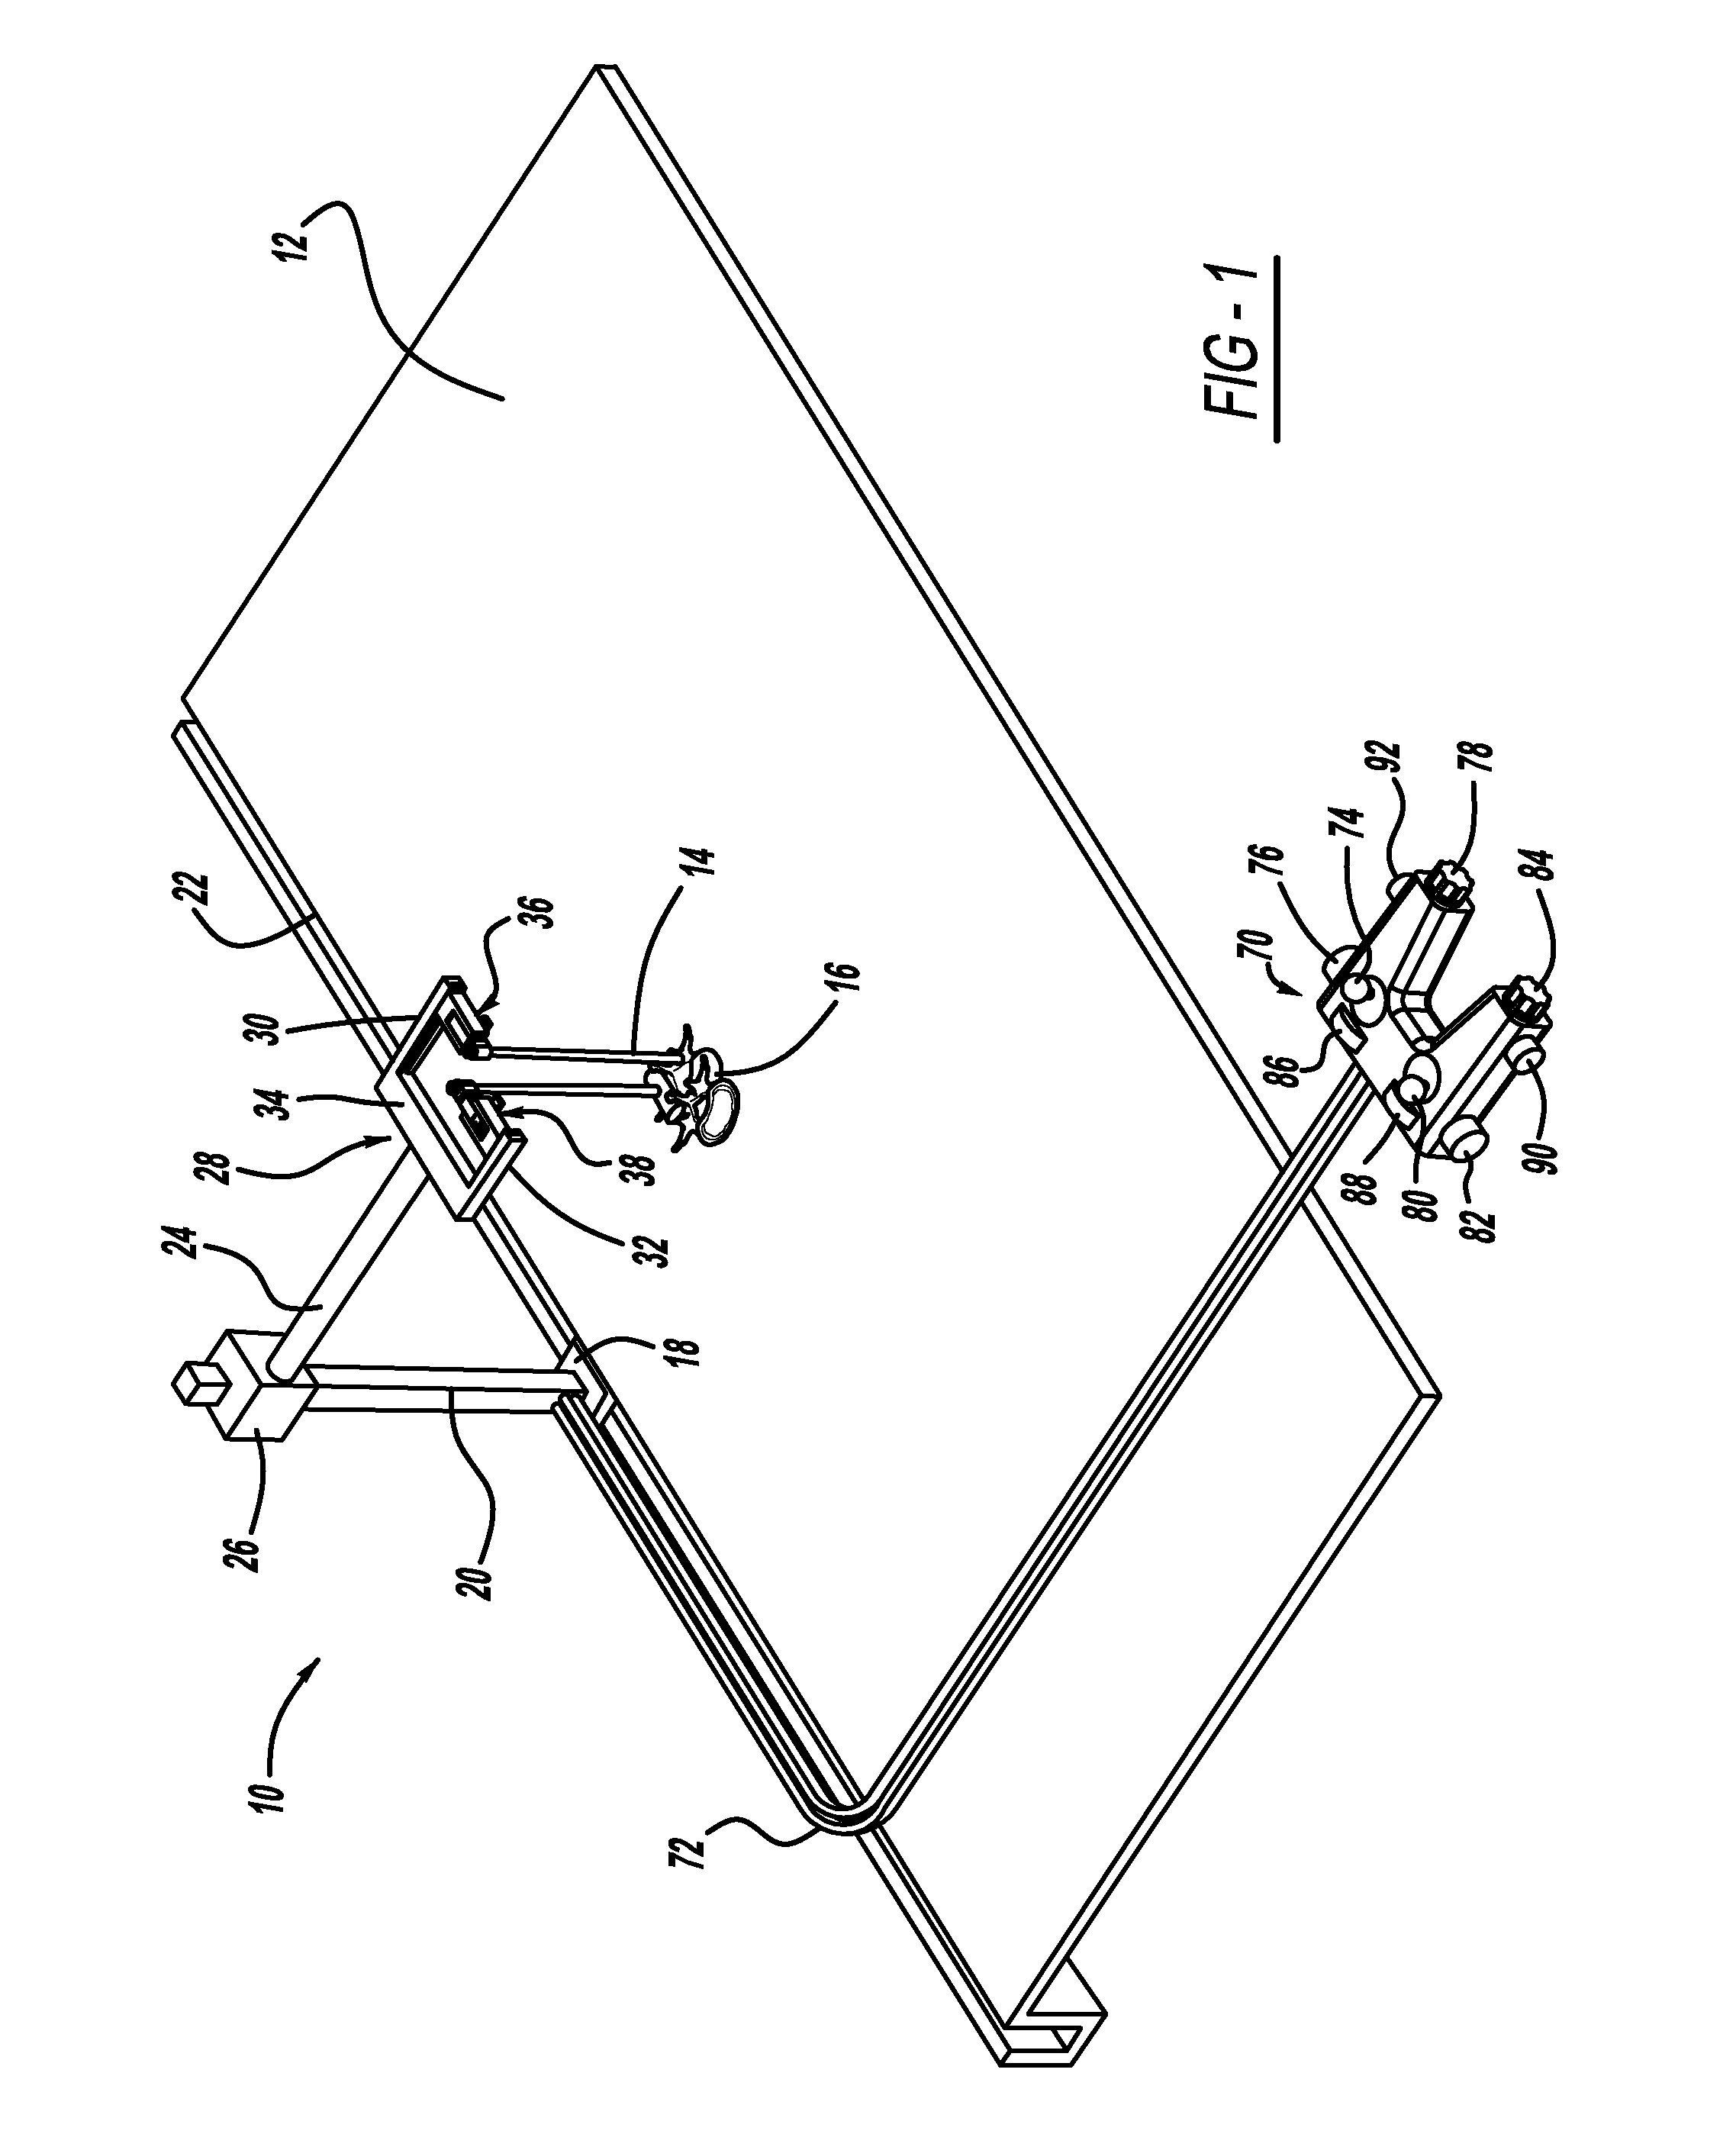 Robotic surgical device implant system